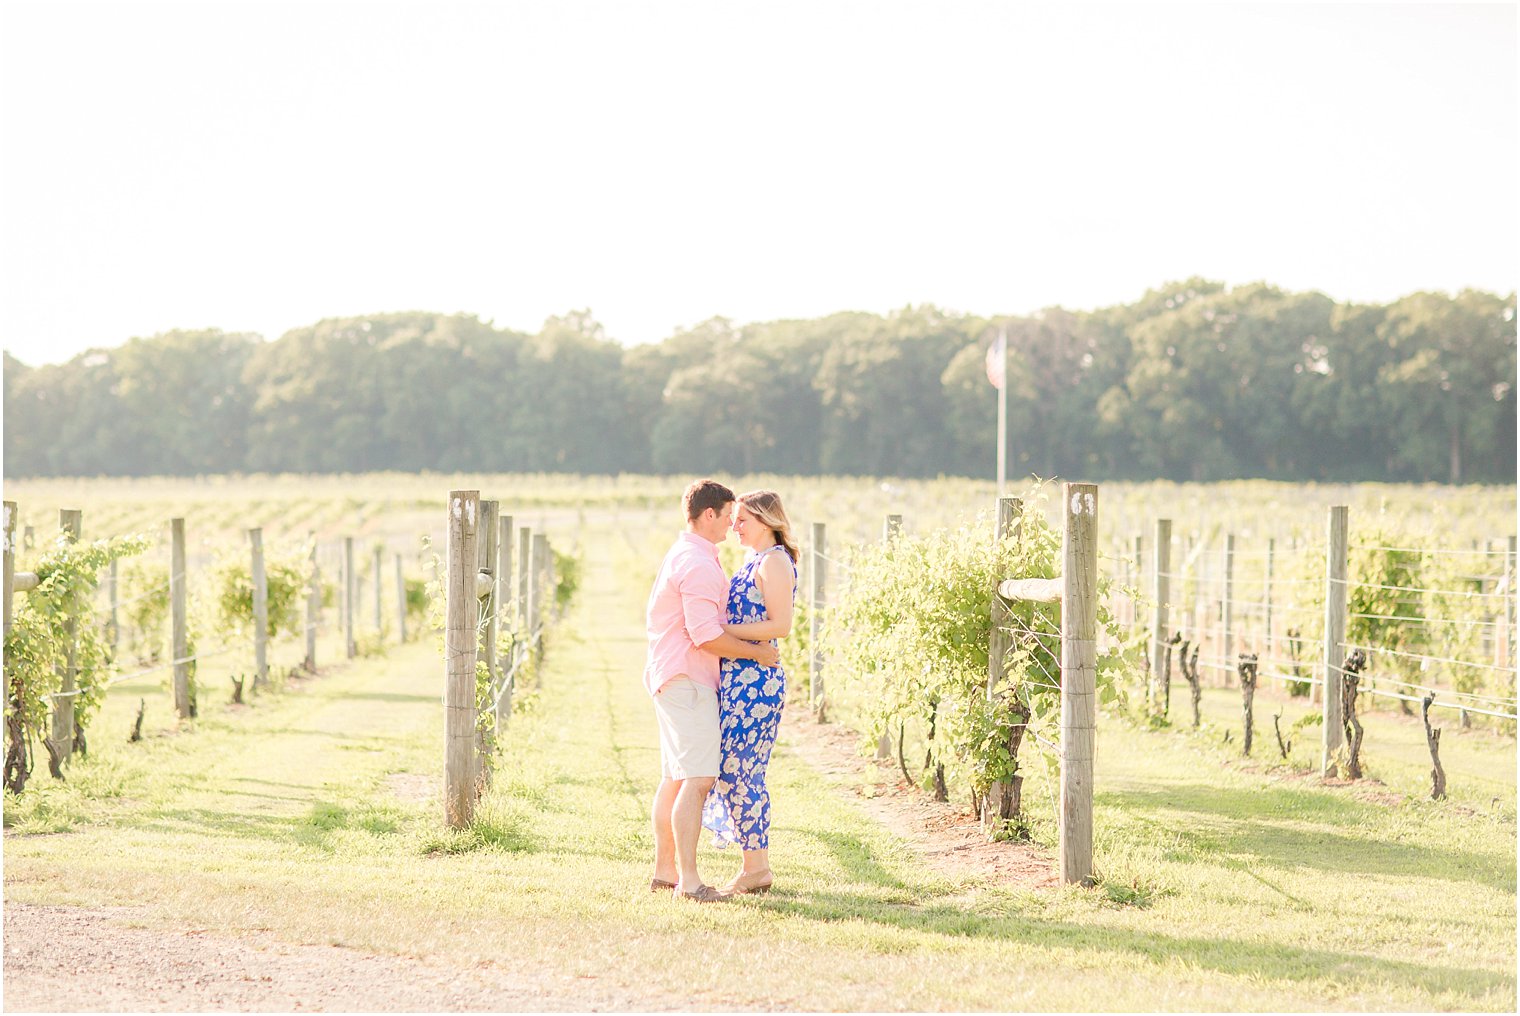 Summer engagement session at Laurita Winery among vines